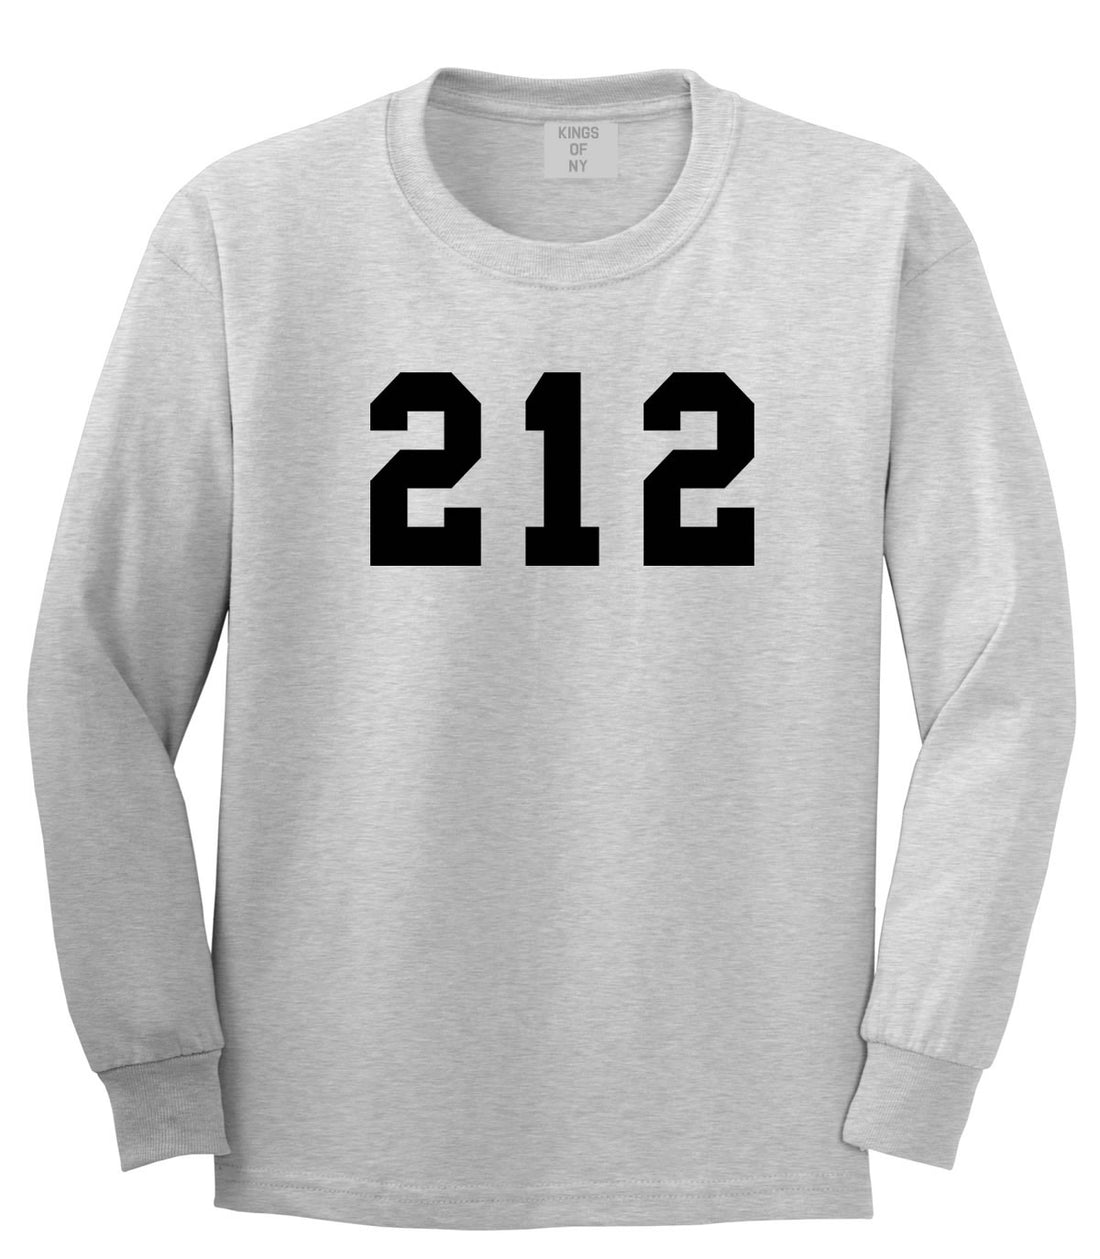 212 New York Area Code Long Sleeve T-Shirt in Grey By Kings Of NY